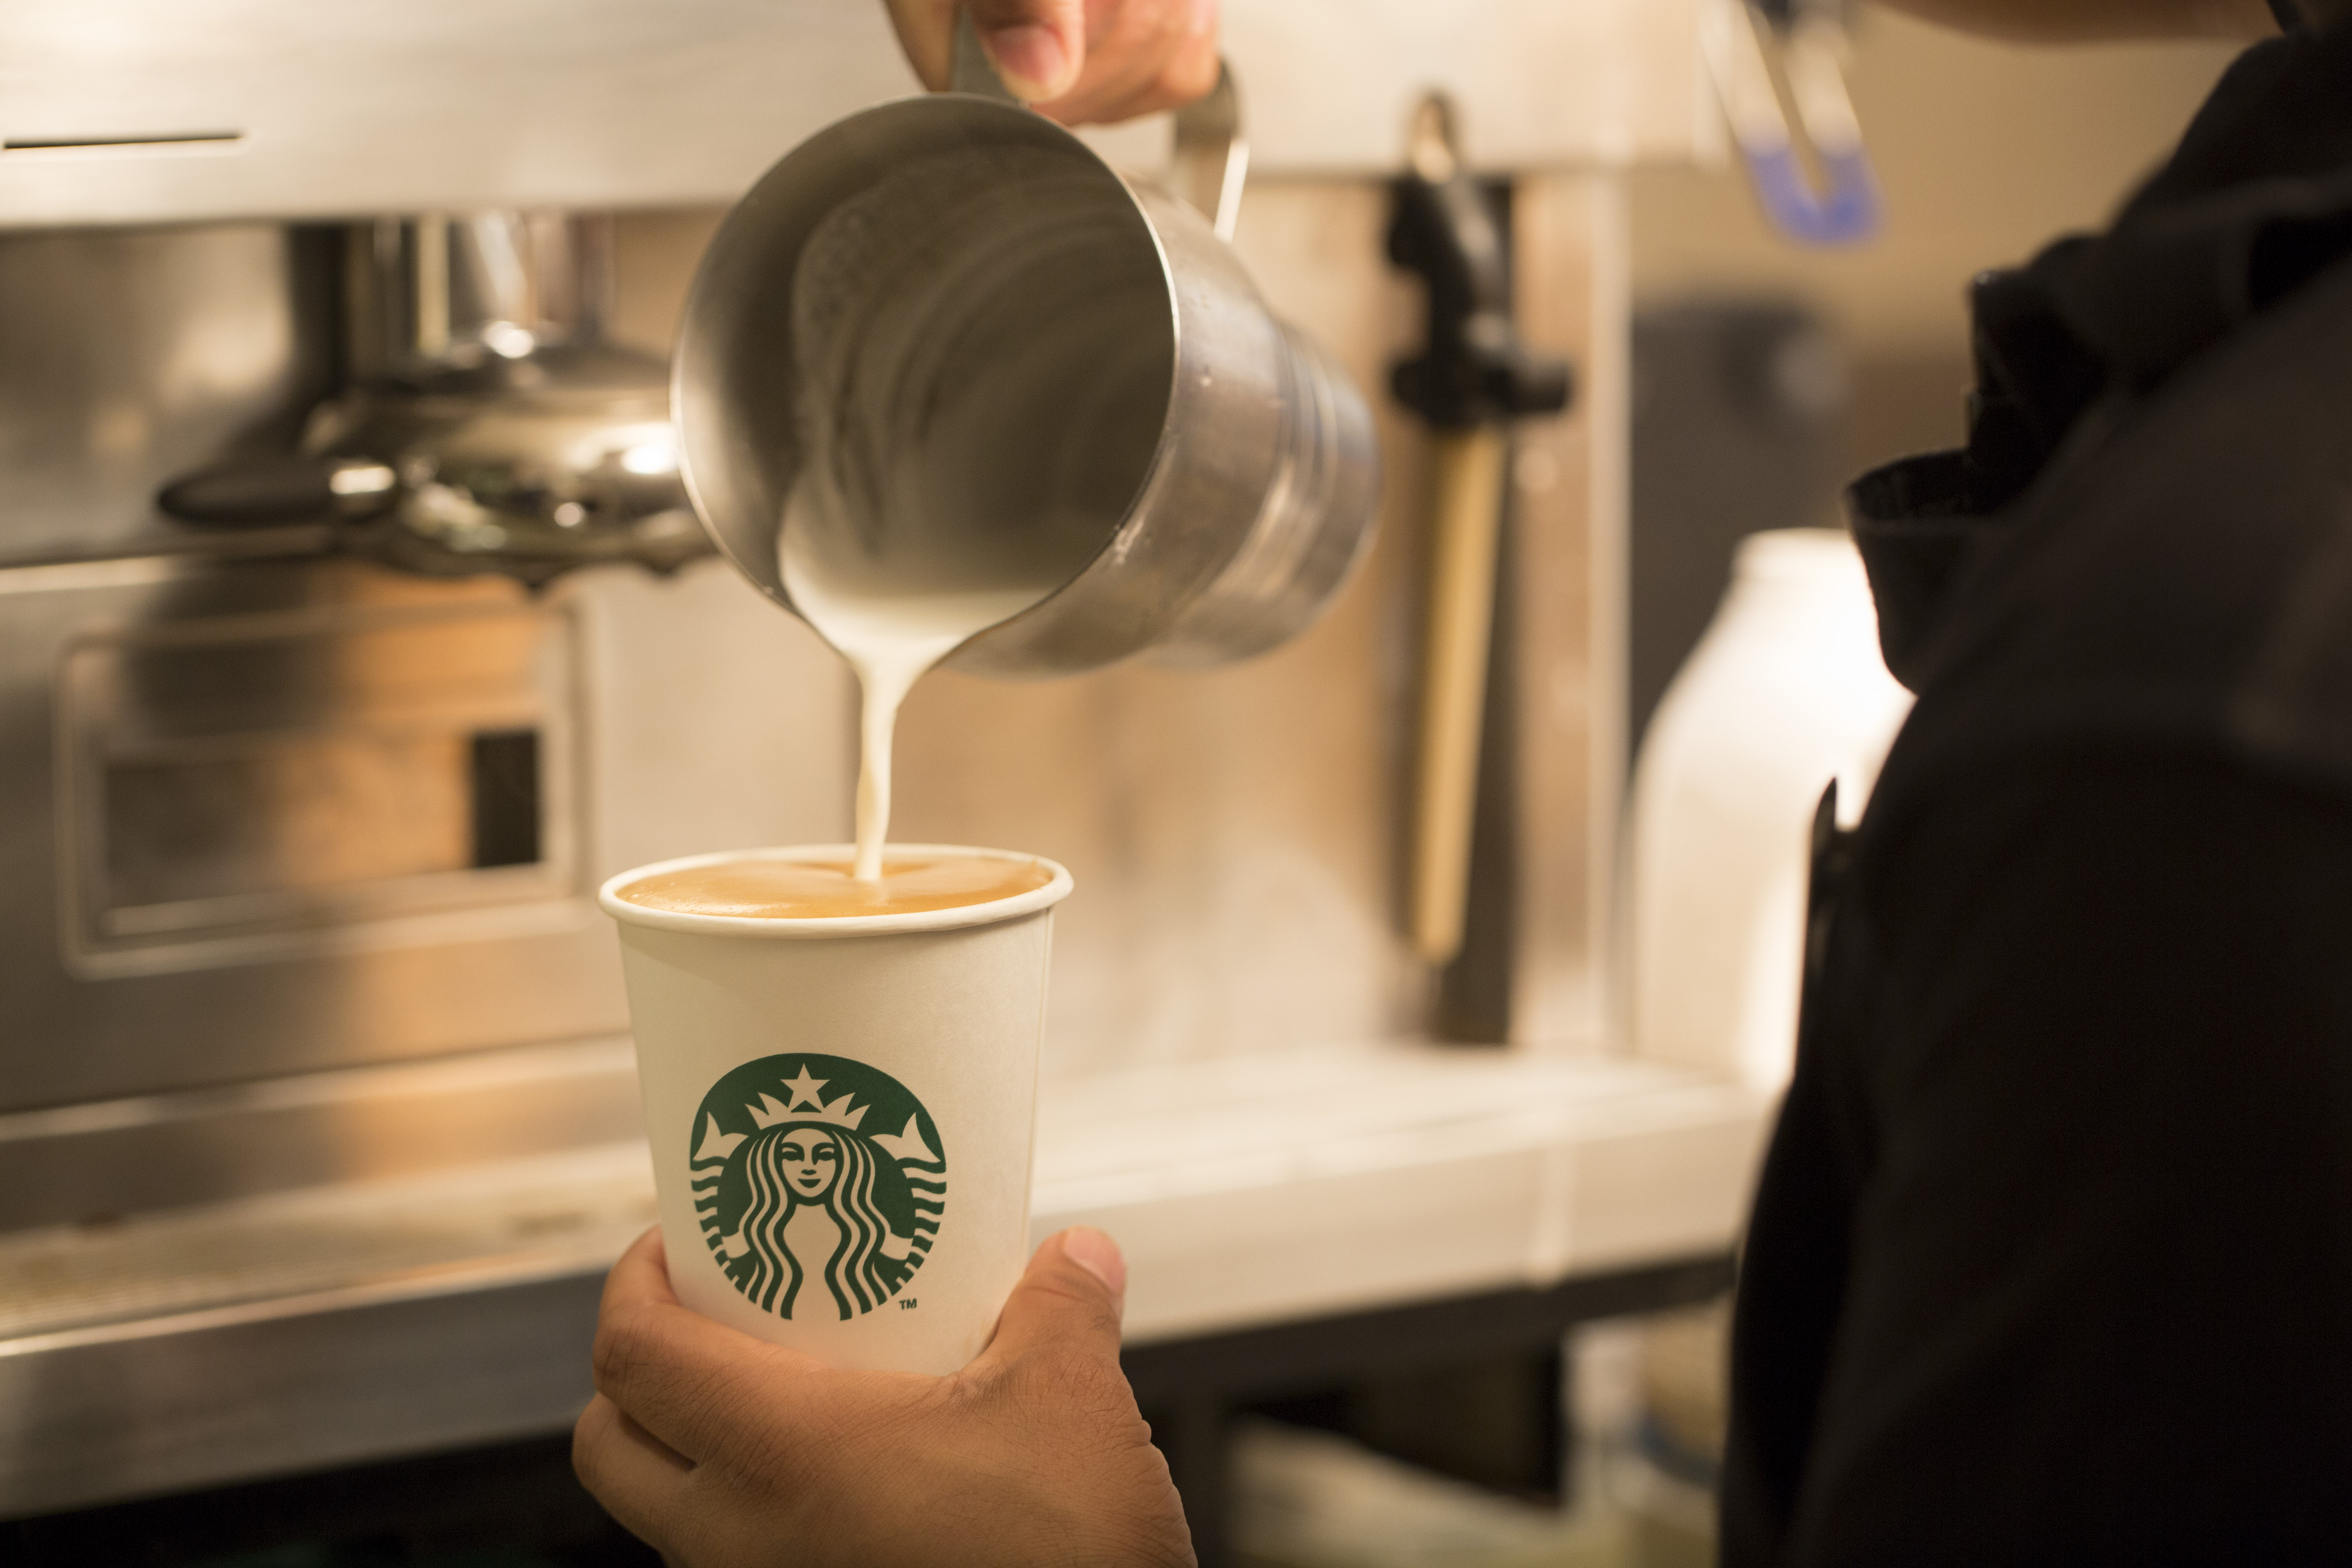 An employee pours milk into a cardboard coffee cup inside a Starbucks Corp. coffee shop in London, U.K., on Monday, Jun. 9, 2014. (Jason Alden—Bloomberg/Getty Images)